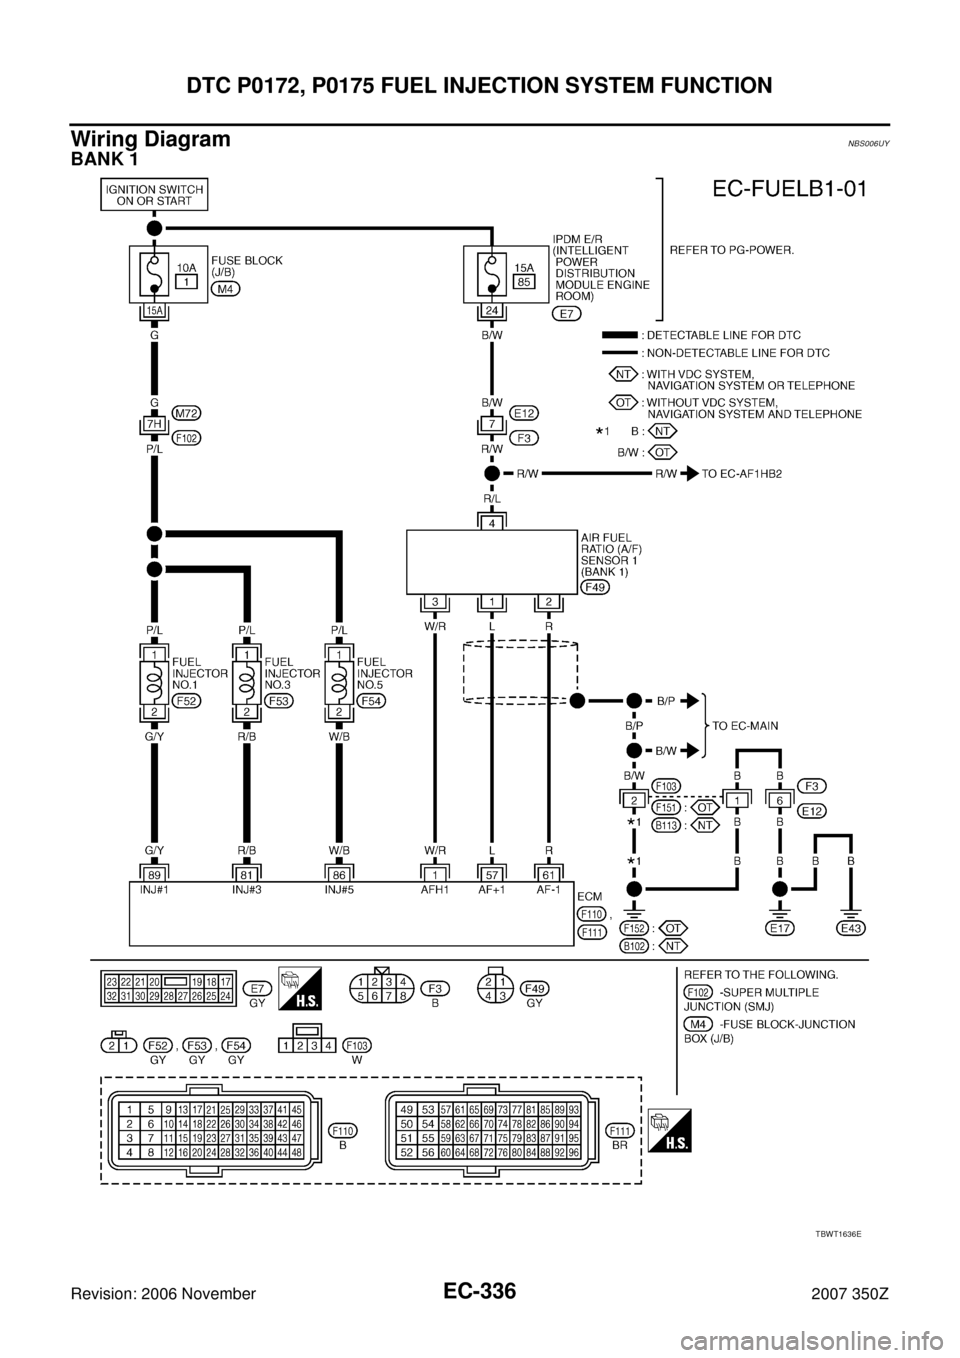 NISSAN 350Z 2007 Z33 Engine Control Workshop Manual EC-336
DTC P0172, P0175 FUEL INJECTION SYSTEM FUNCTION
Revision: 2006 November2007 350Z
Wiring DiagramNBS006UY
BANK 1
TBWT1636E 